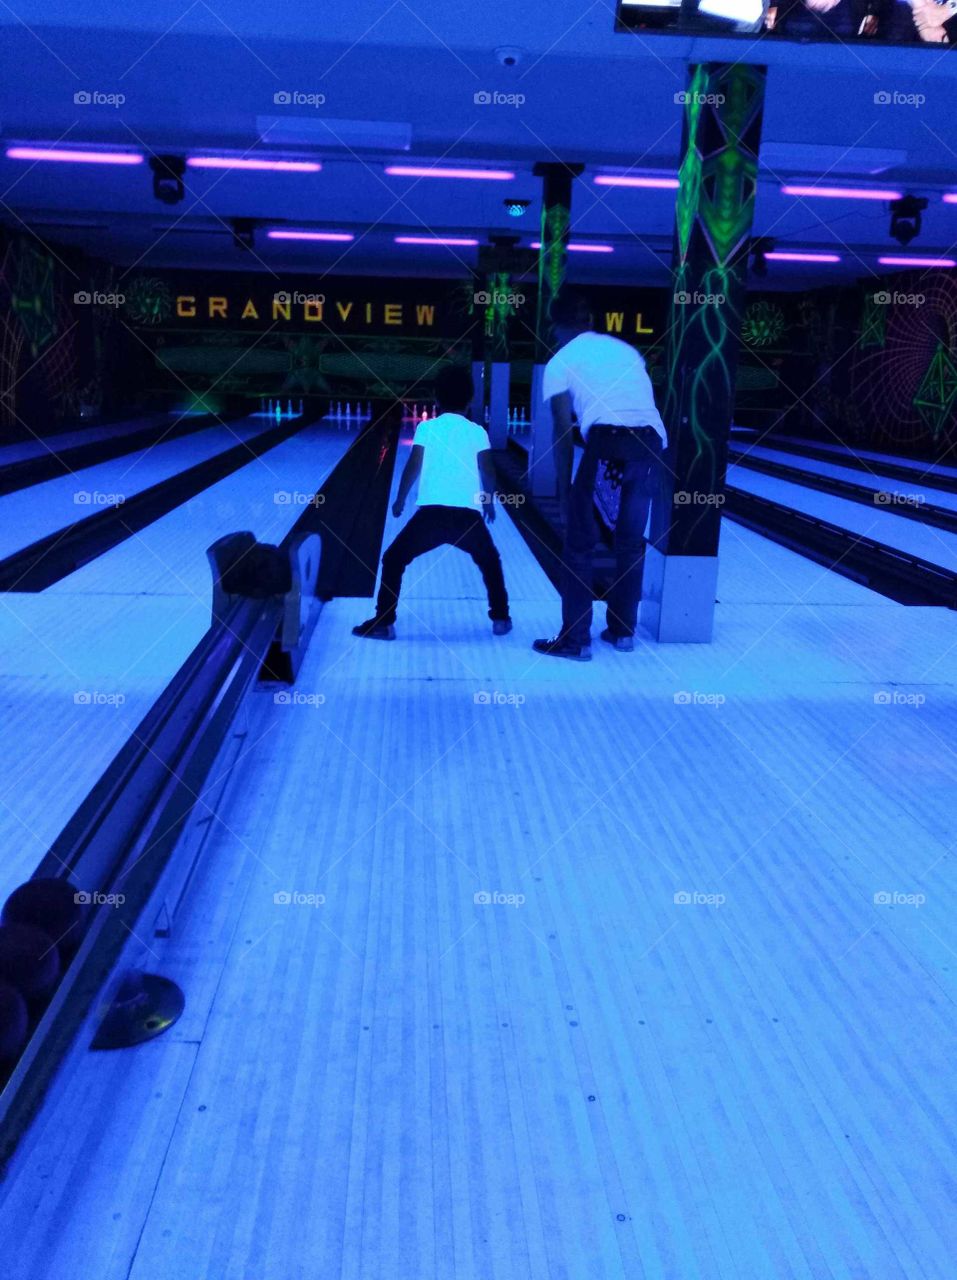 allow us to light up the room and show you how to bowl